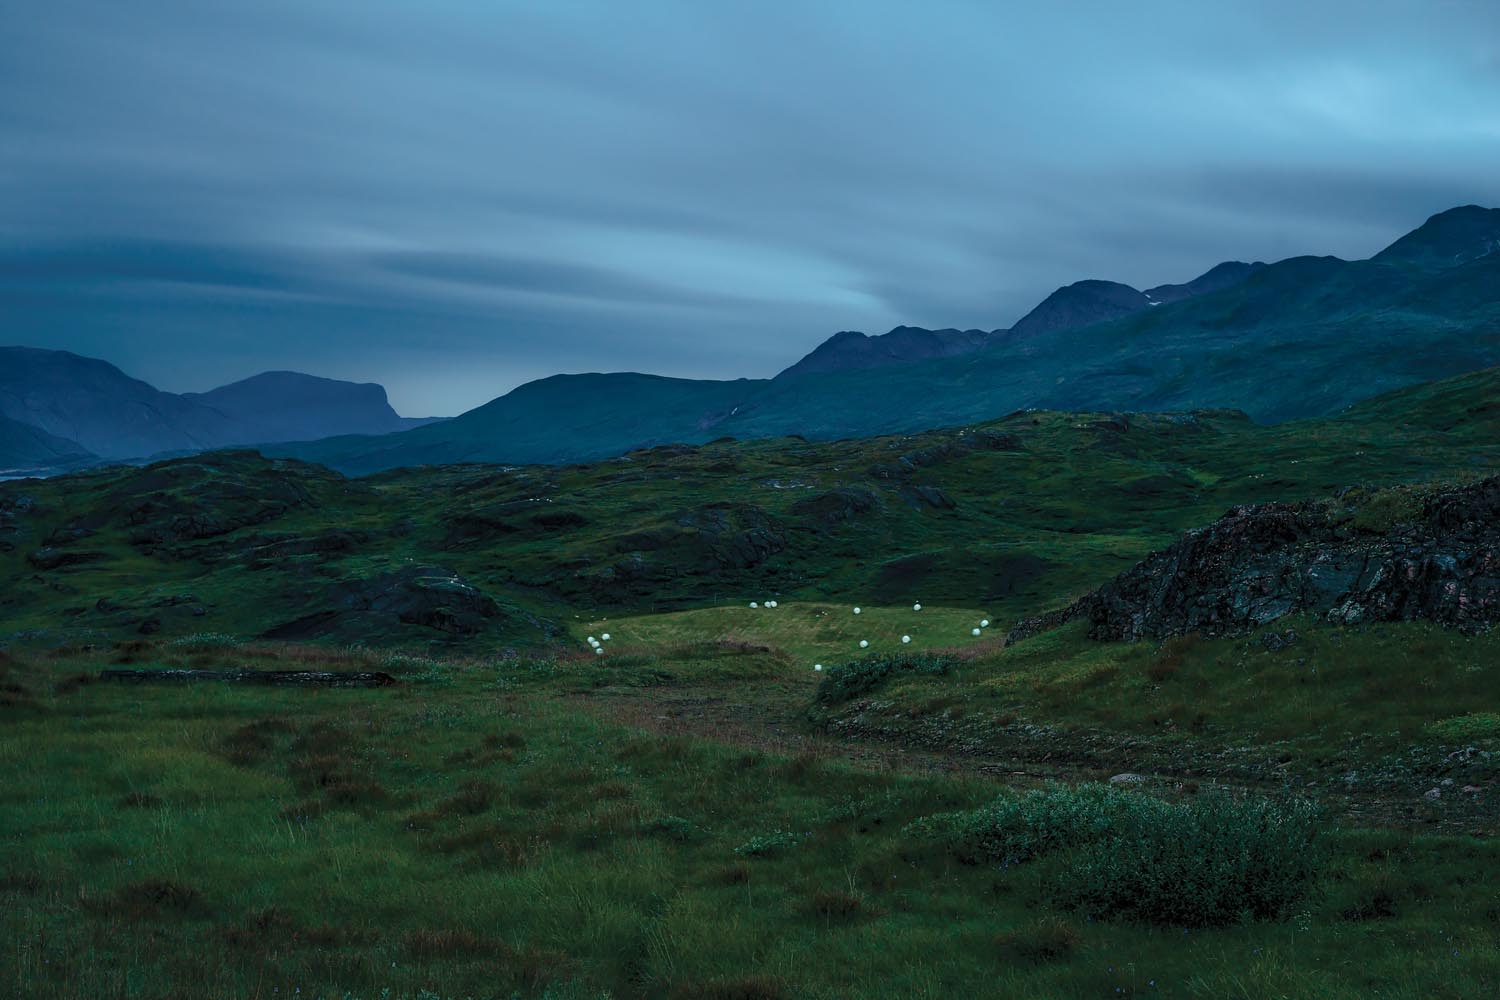 Shadow and Light: New Night Landscape Photographs of Greenland By Steve Giovinco. Sheep Farm at Night with Pods